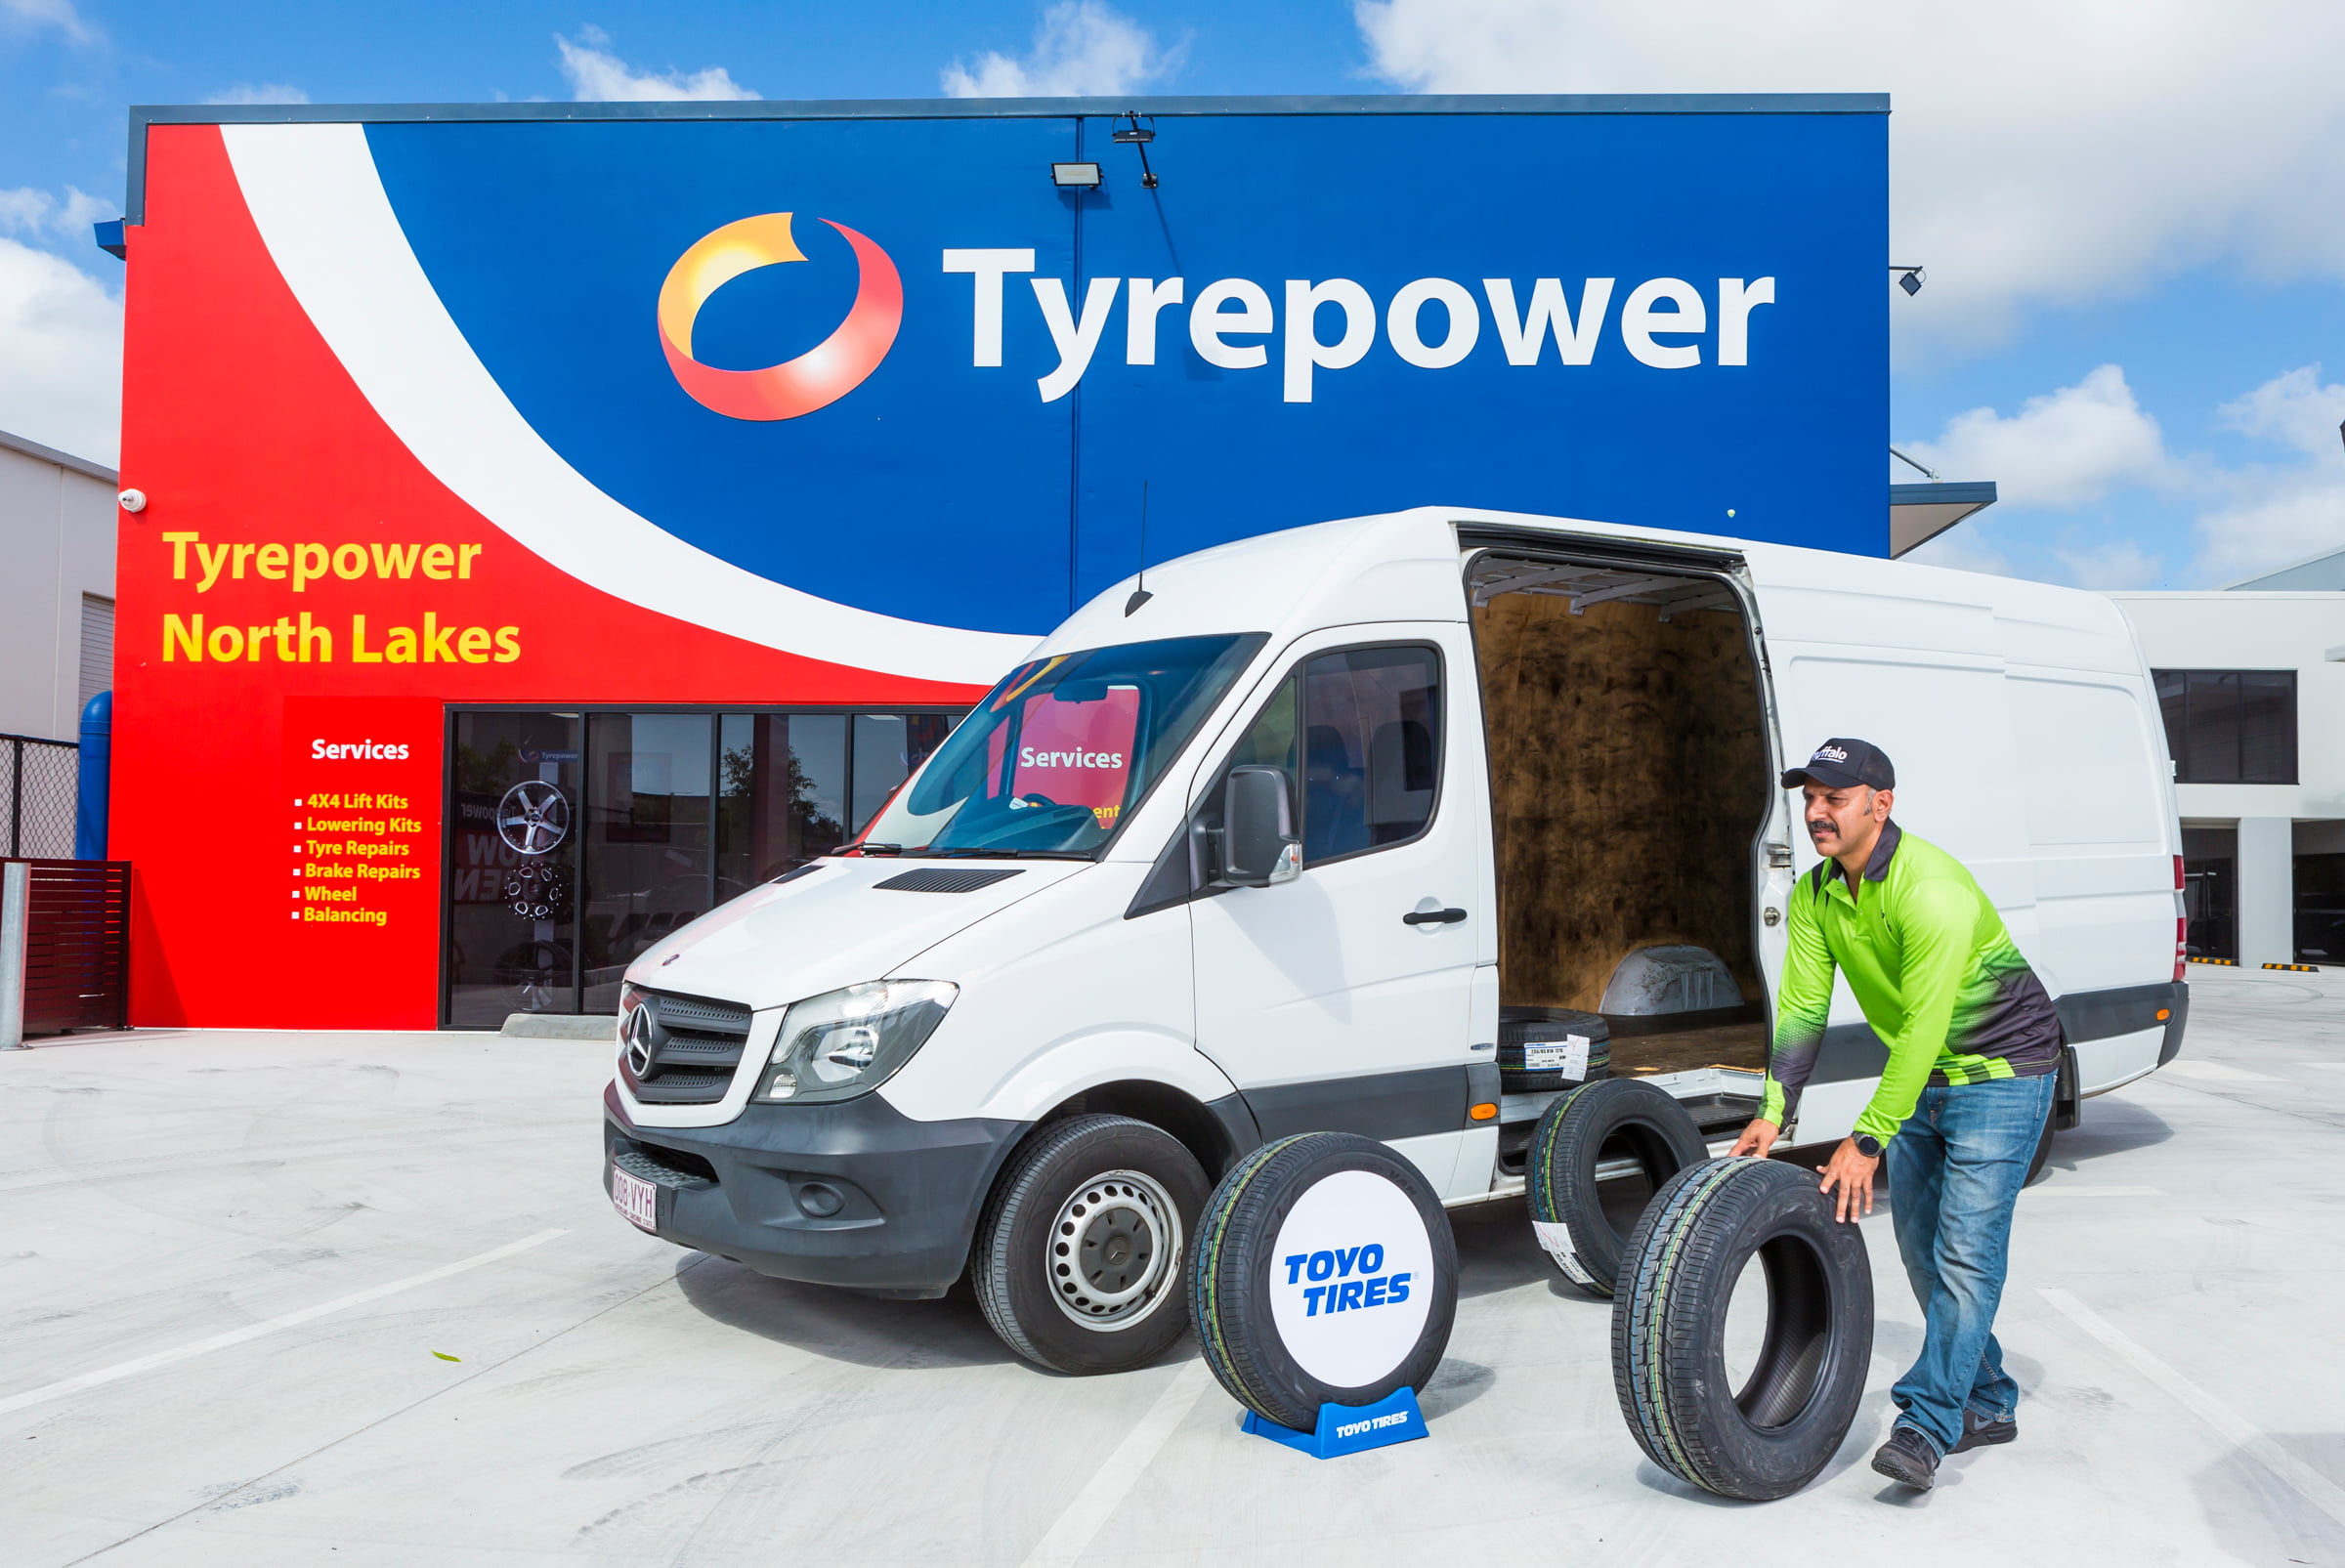 The recent release of the NanoEnergy Van tyre by Toyo Tires heralds a major redesign of premium tyre options, specifically for owners of vans, utes, people movers, motorhomes, caravans and trailers.